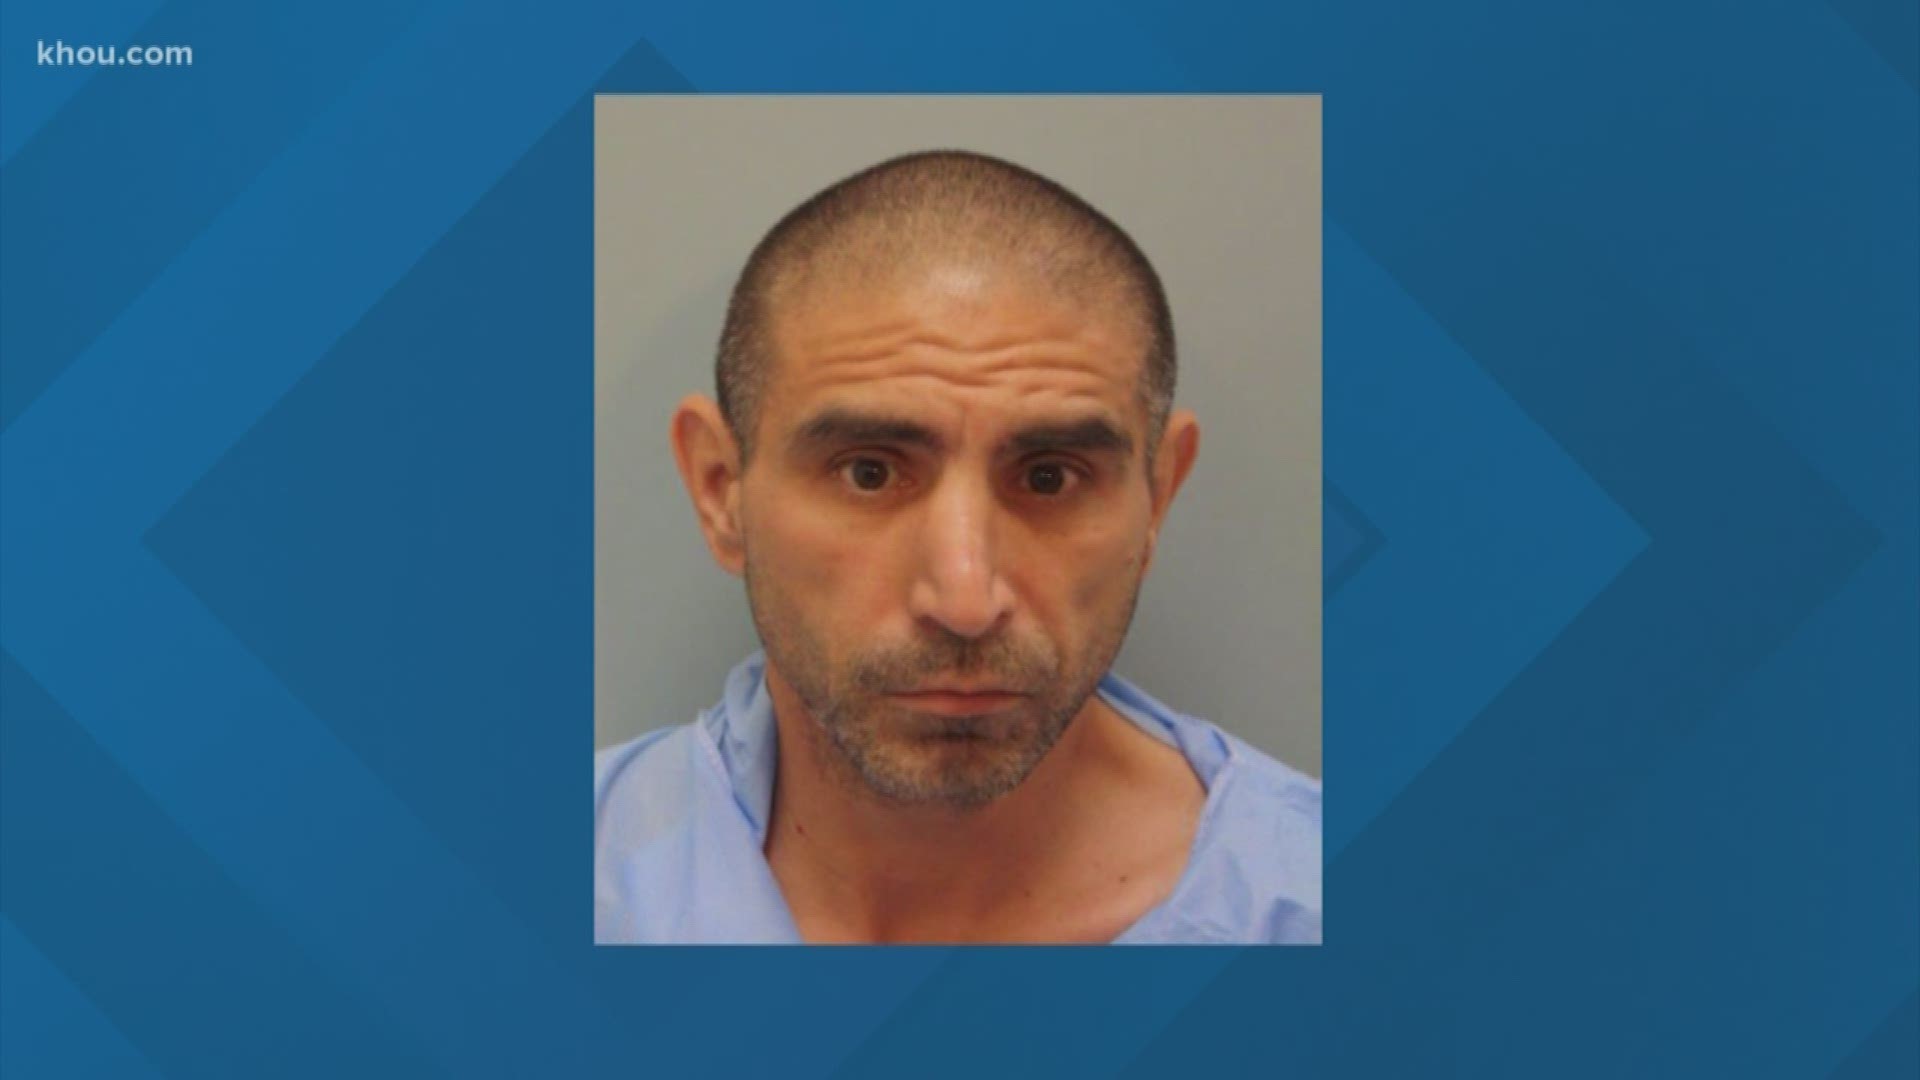 Deputy Sandeep Dhaliwal's suspected shooter was convicted of DWI while on parole in 2016, but the parole board elected not to send him back to prison.